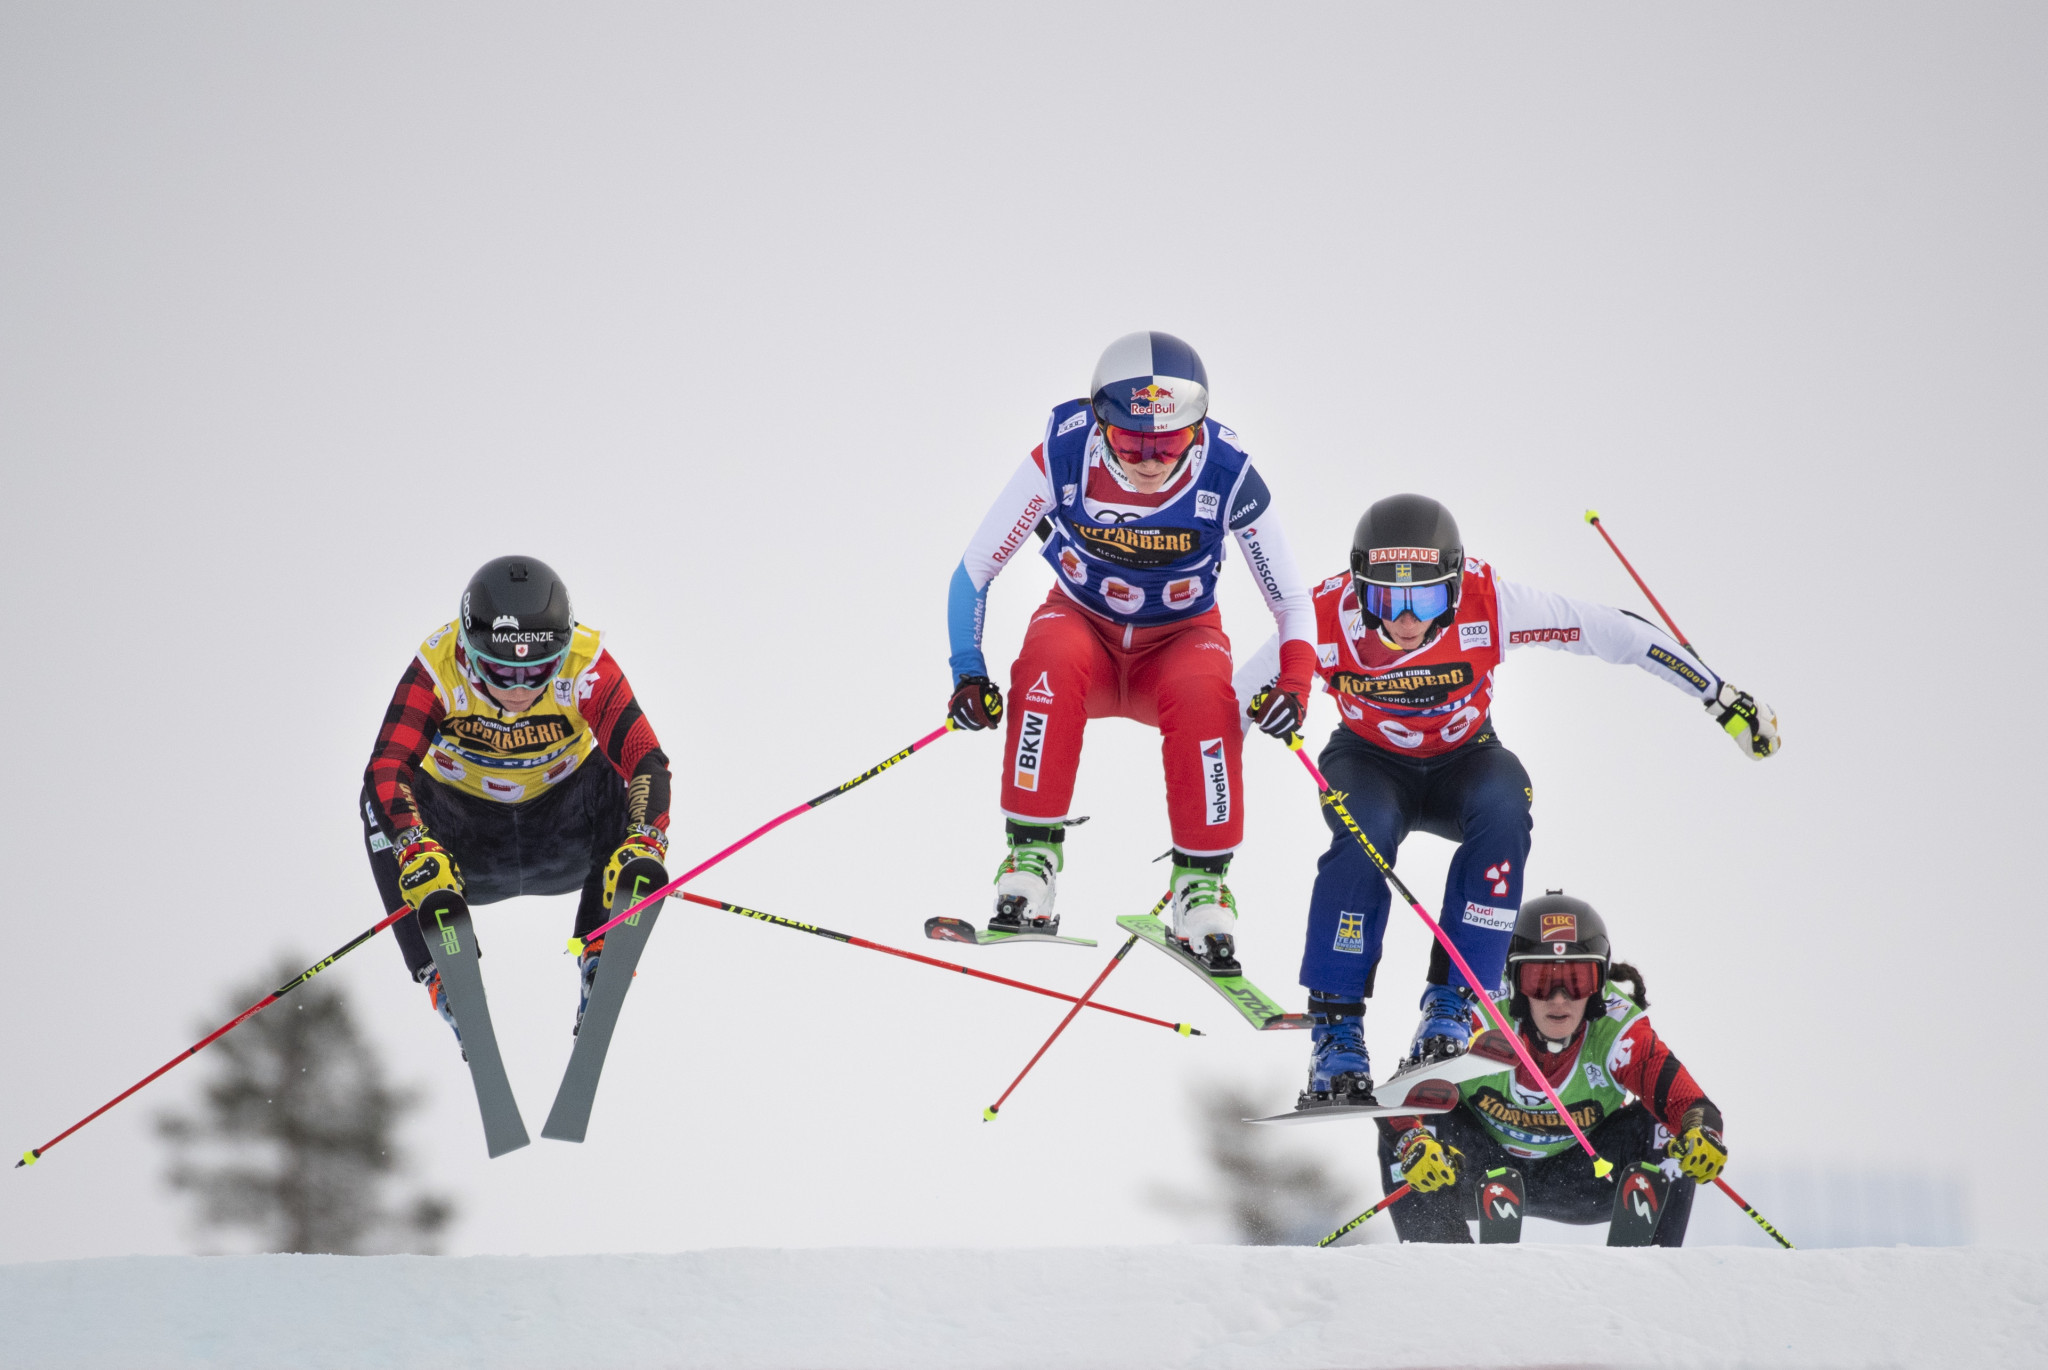 Swiss double as Smith wins in Idre on 100th Ski Cross World Cup start